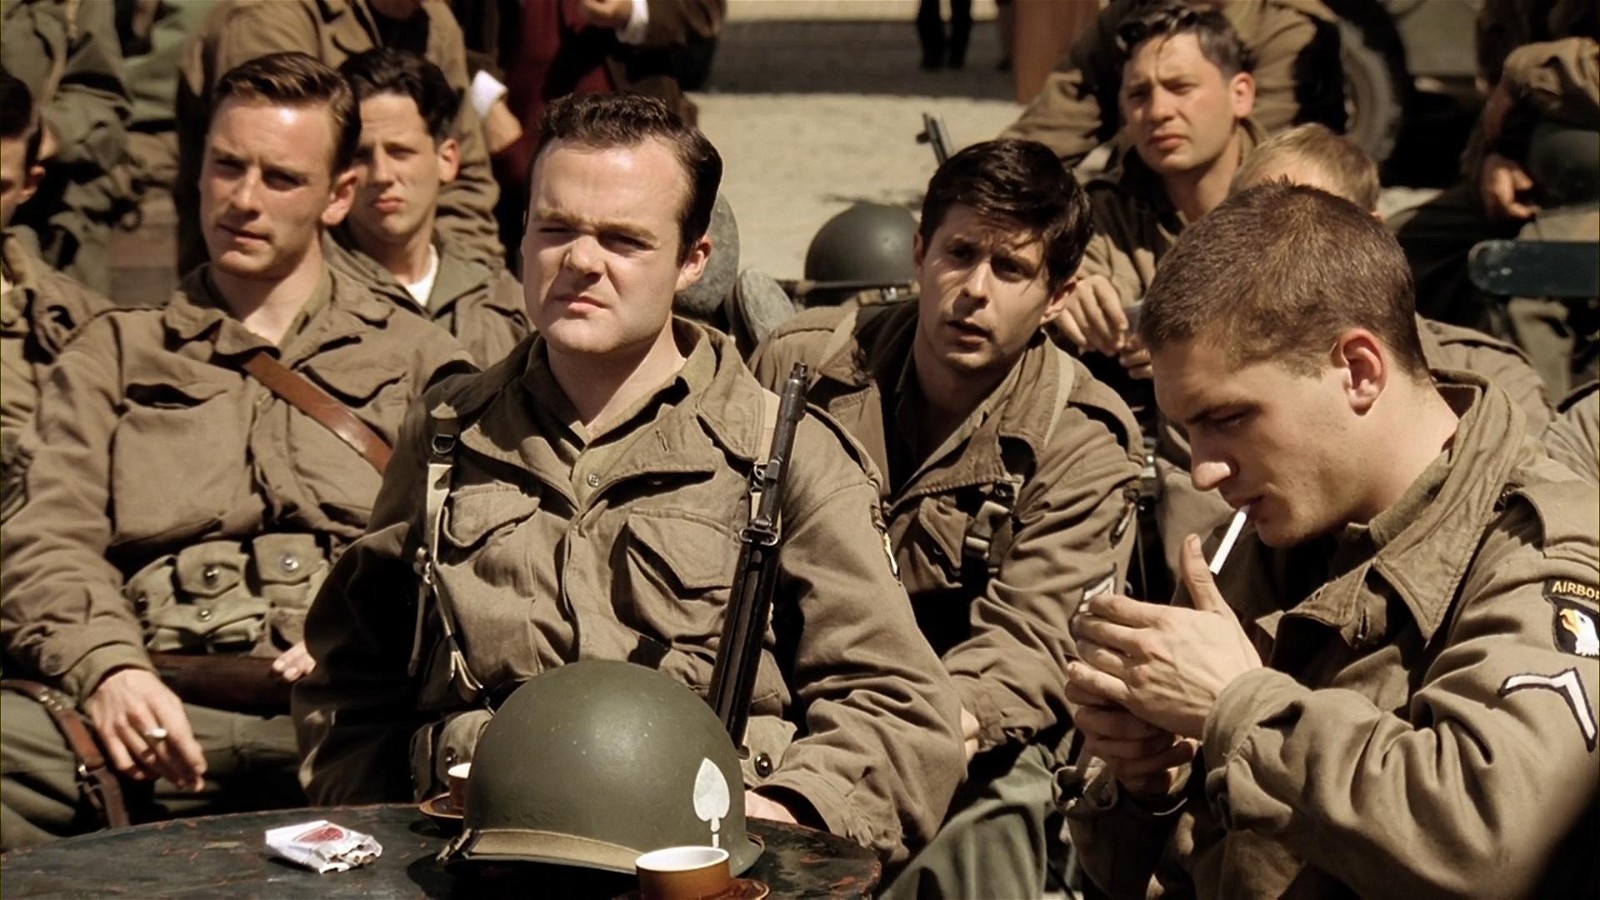 Michael Fassbender (extreme left) and Tom Hardy (extreme right) in a still from Band of Brothers